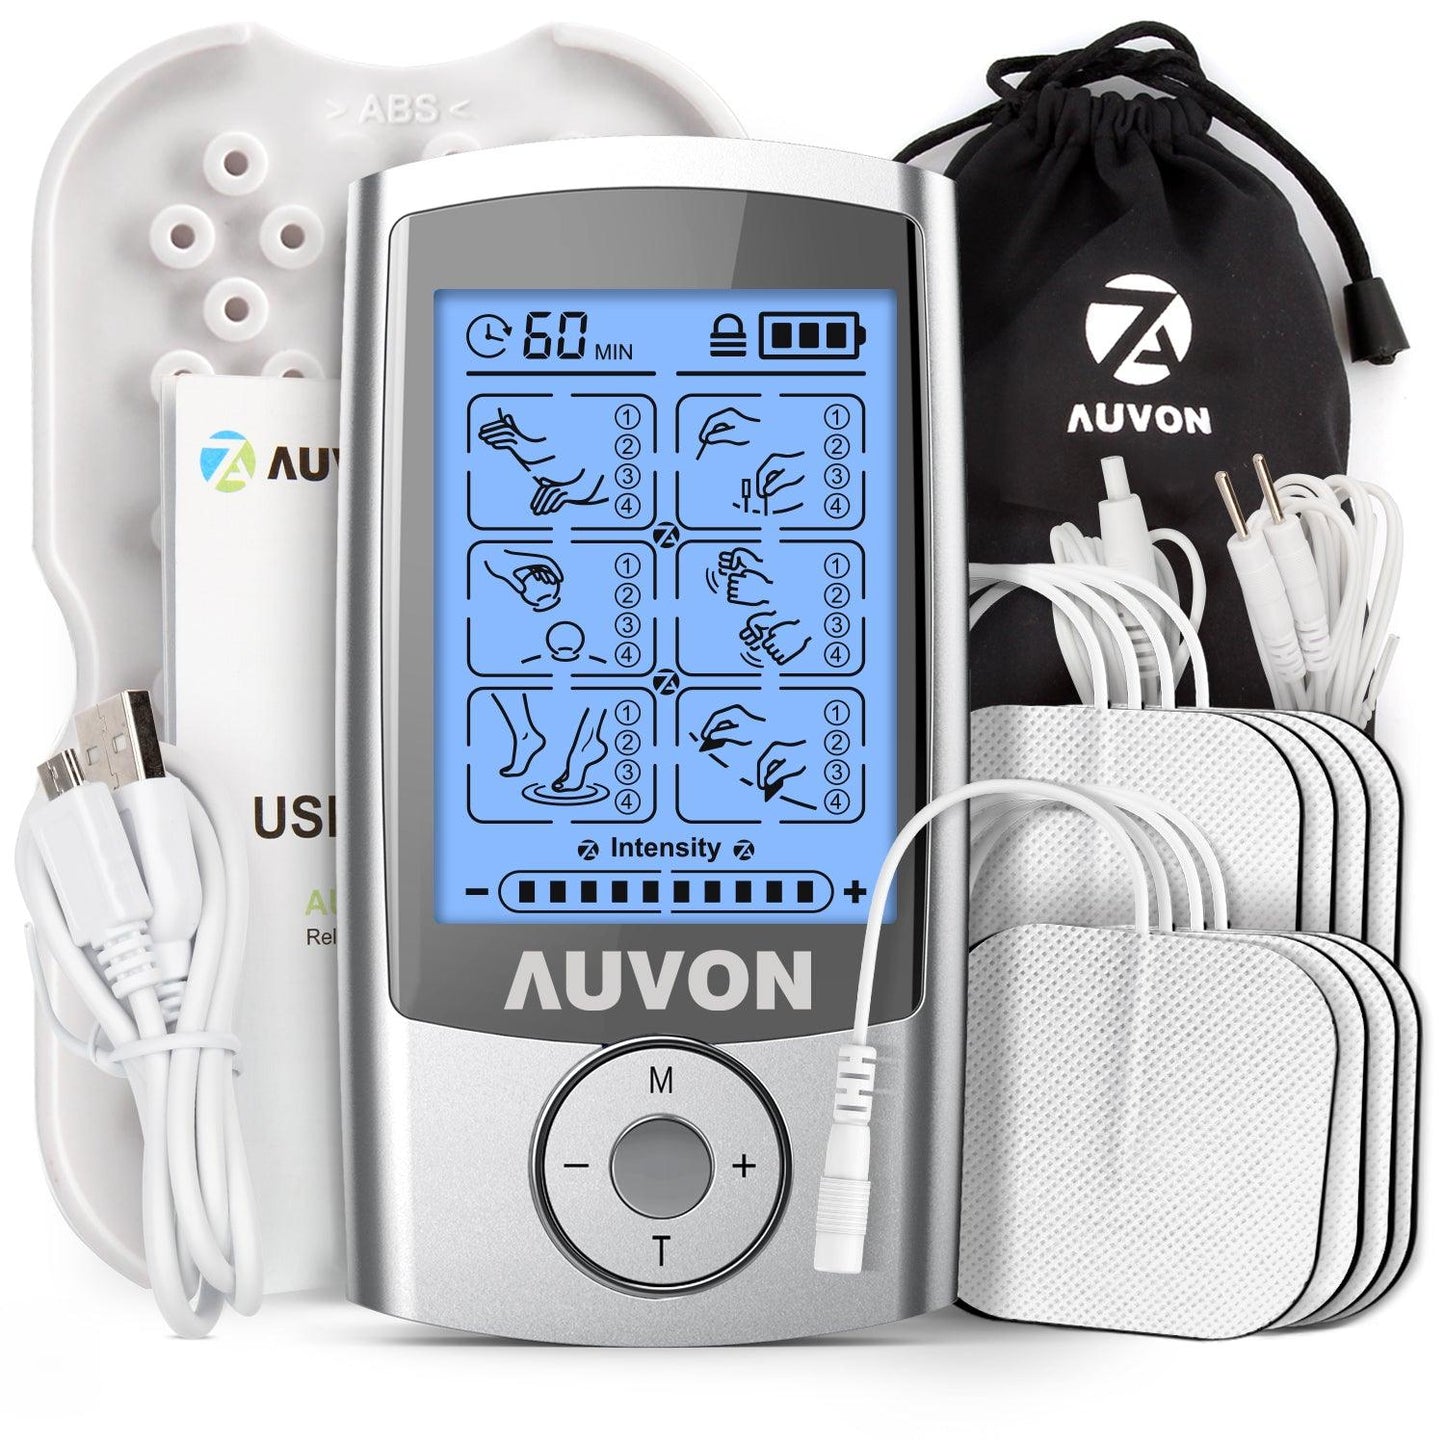 AUVON Dual Channel Tens Unit Muscle Stimulator Machine with 20 Modes, 2 and